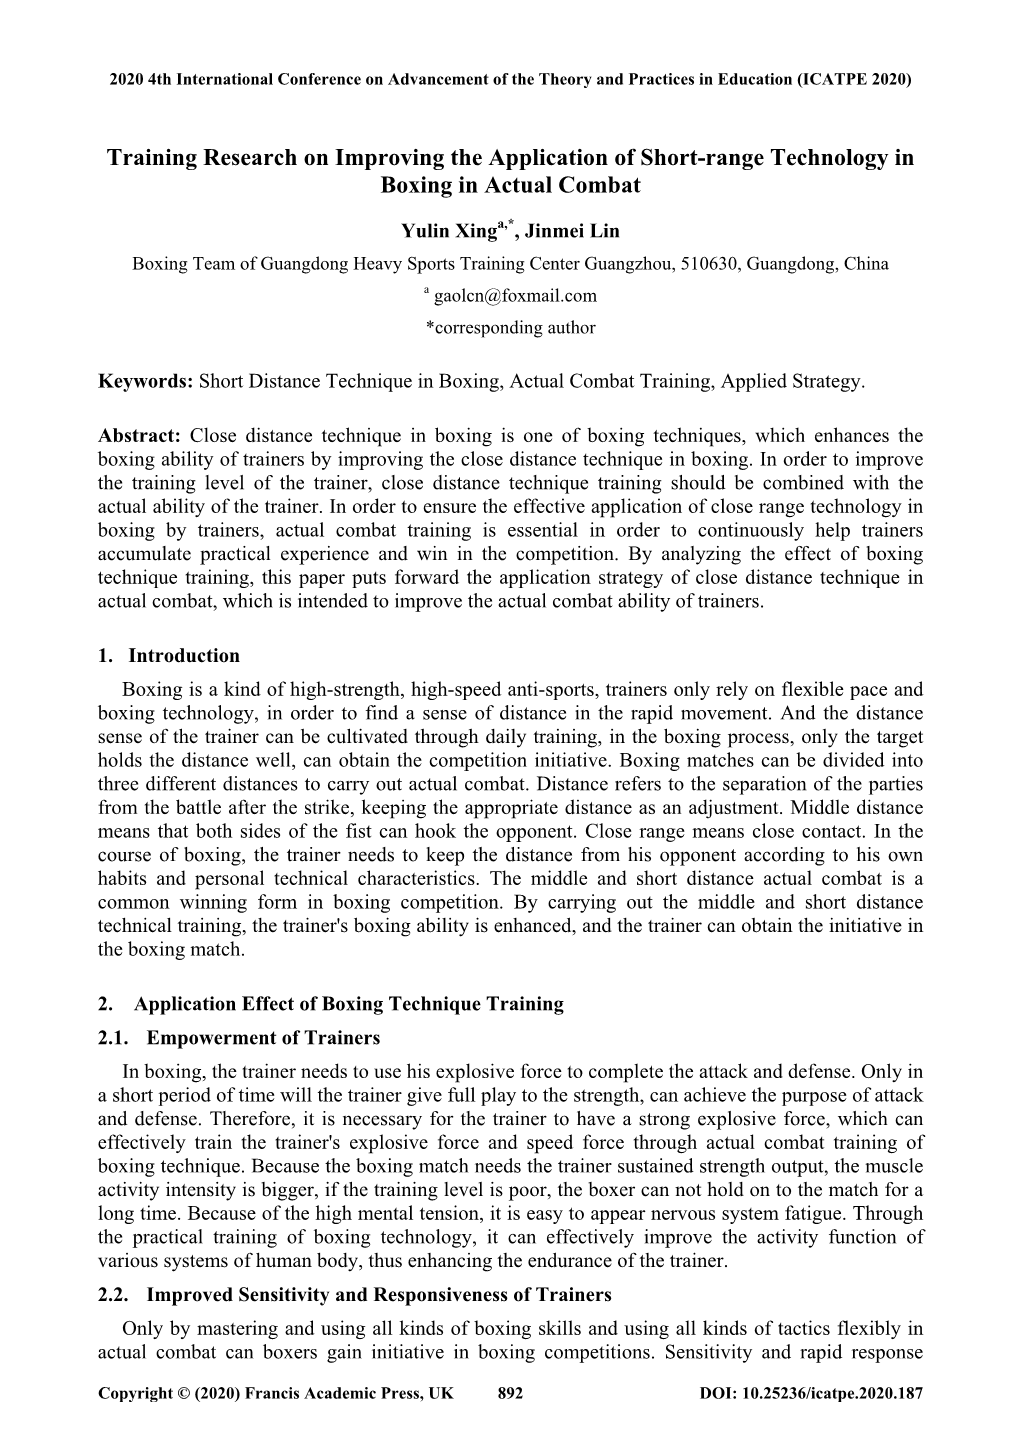 Training Research on Improving the Application of Short-Range Technology in Boxing in Actual Combat